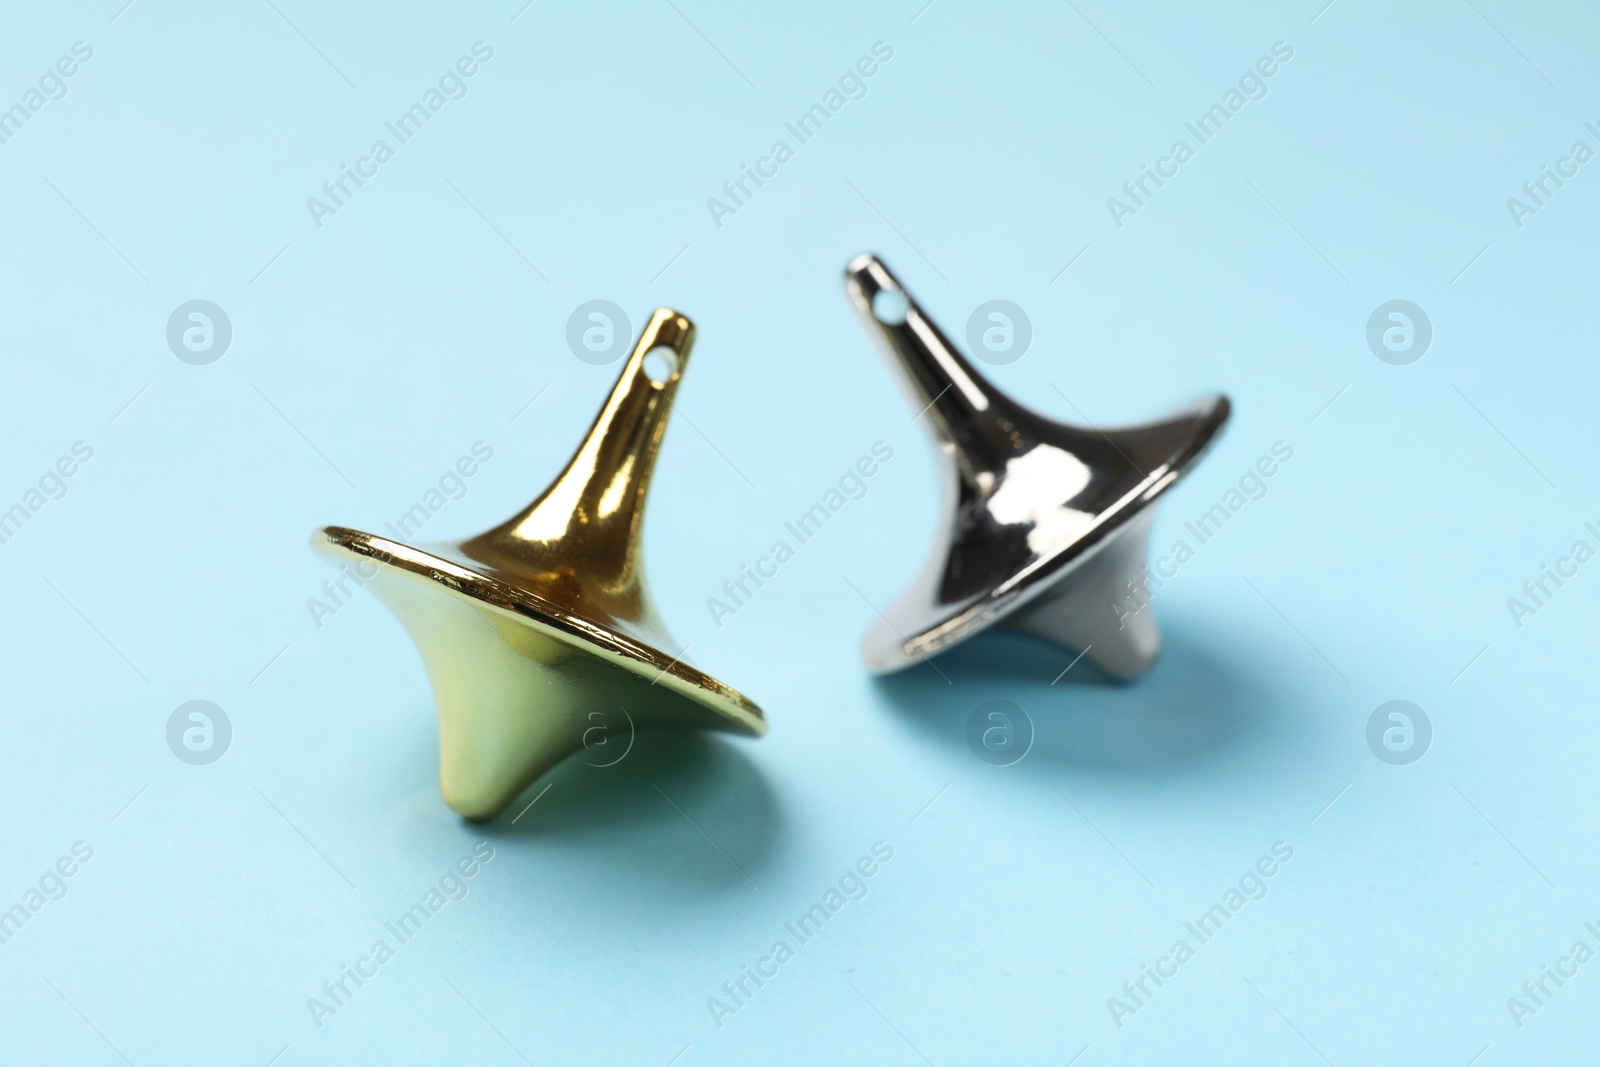 Photo of Golden and silver spinning tops on light blue background, closeup